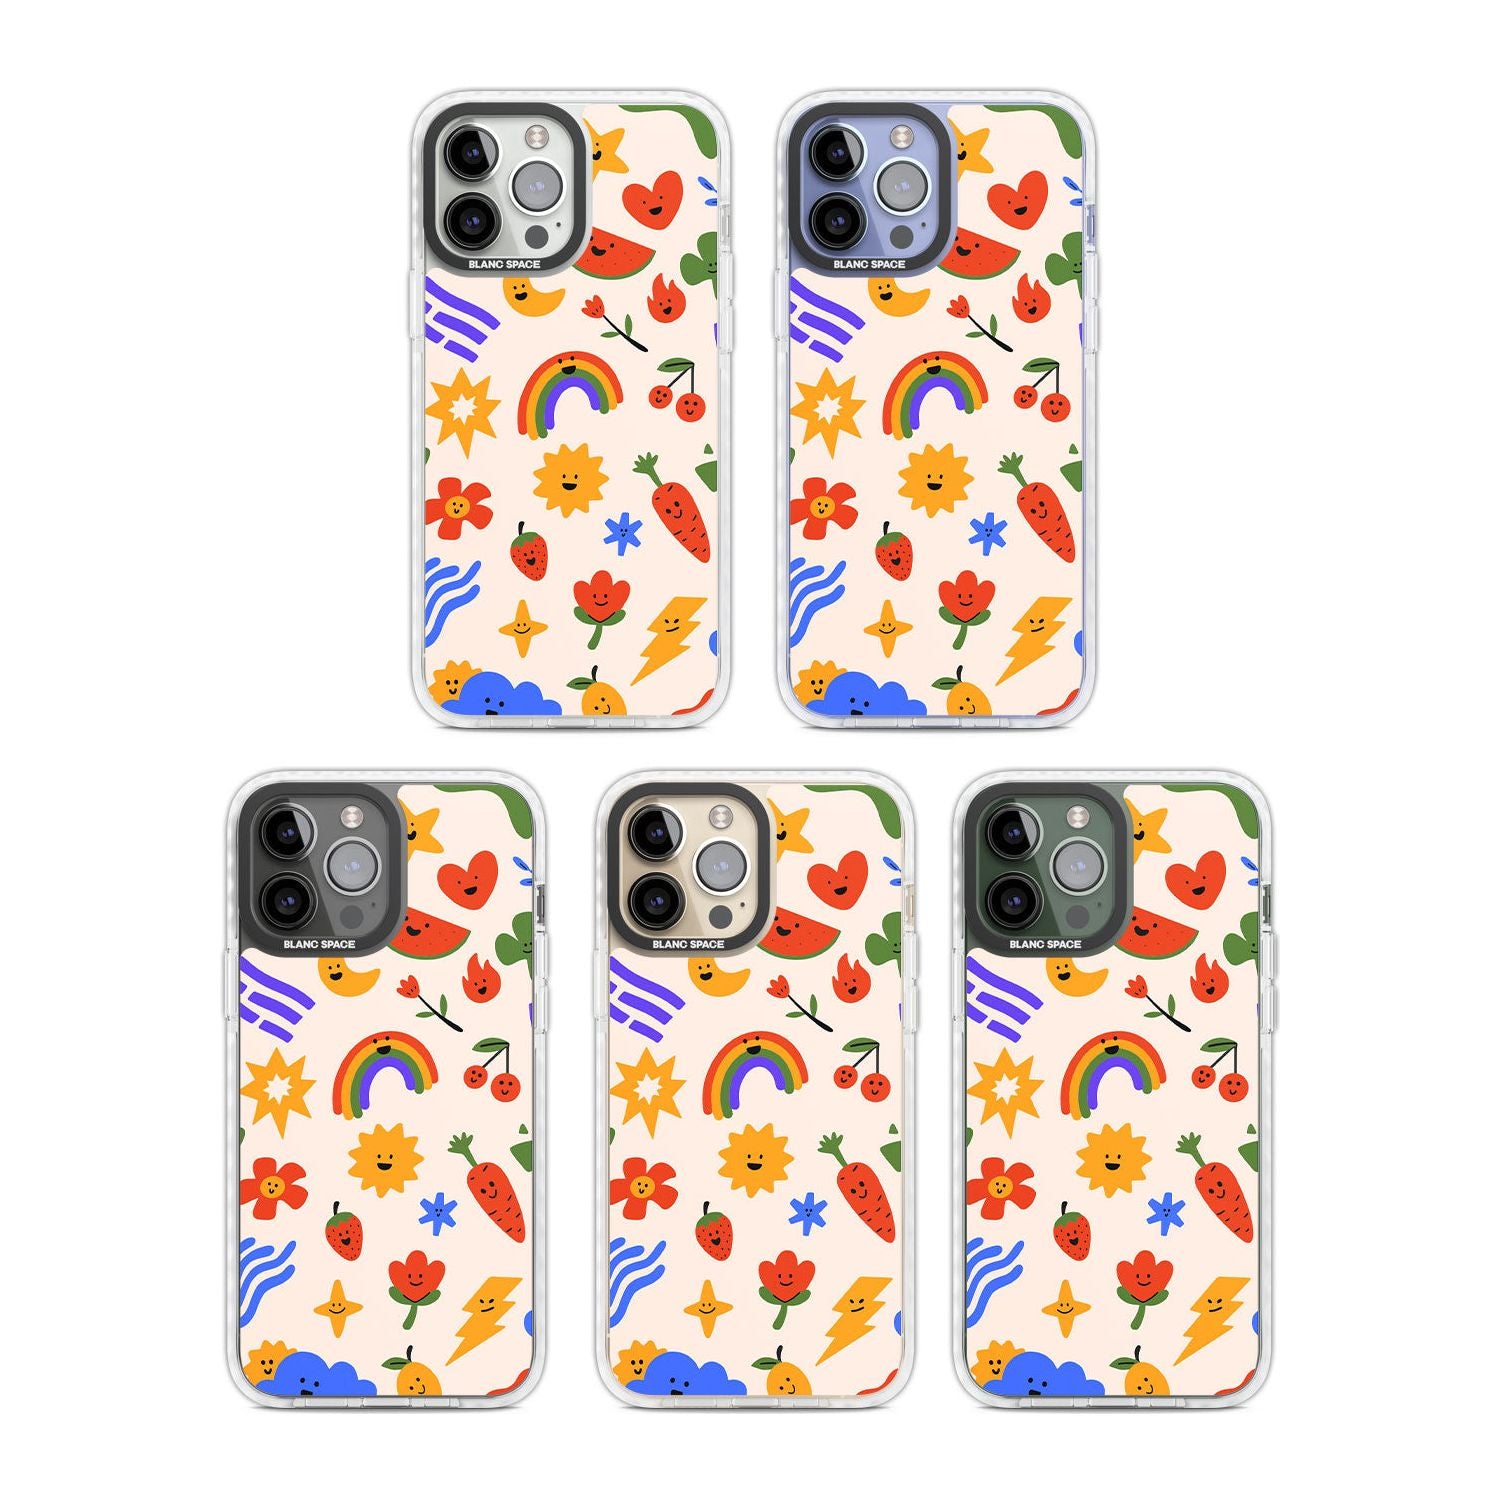 Mixed Large Kawaii Icons - Solid Phone Case iPhone 15 Pro Max / Black Impact Case,iPhone 15 Plus / Black Impact Case,iPhone 15 Pro / Black Impact Case,iPhone 15 / Black Impact Case,iPhone 15 Pro Max / Impact Case,iPhone 15 Plus / Impact Case,iPhone 15 Pro / Impact Case,iPhone 15 / Impact Case,iPhone 15 Pro Max / Magsafe Black Impact Case,iPhone 15 Plus / Magsafe Black Impact Case,iPhone 15 Pro / Magsafe Black Impact Case,iPhone 15 / Magsafe Black Impact Case,iPhone 14 Pro Max / Black Impact Case,iPhone 14 P